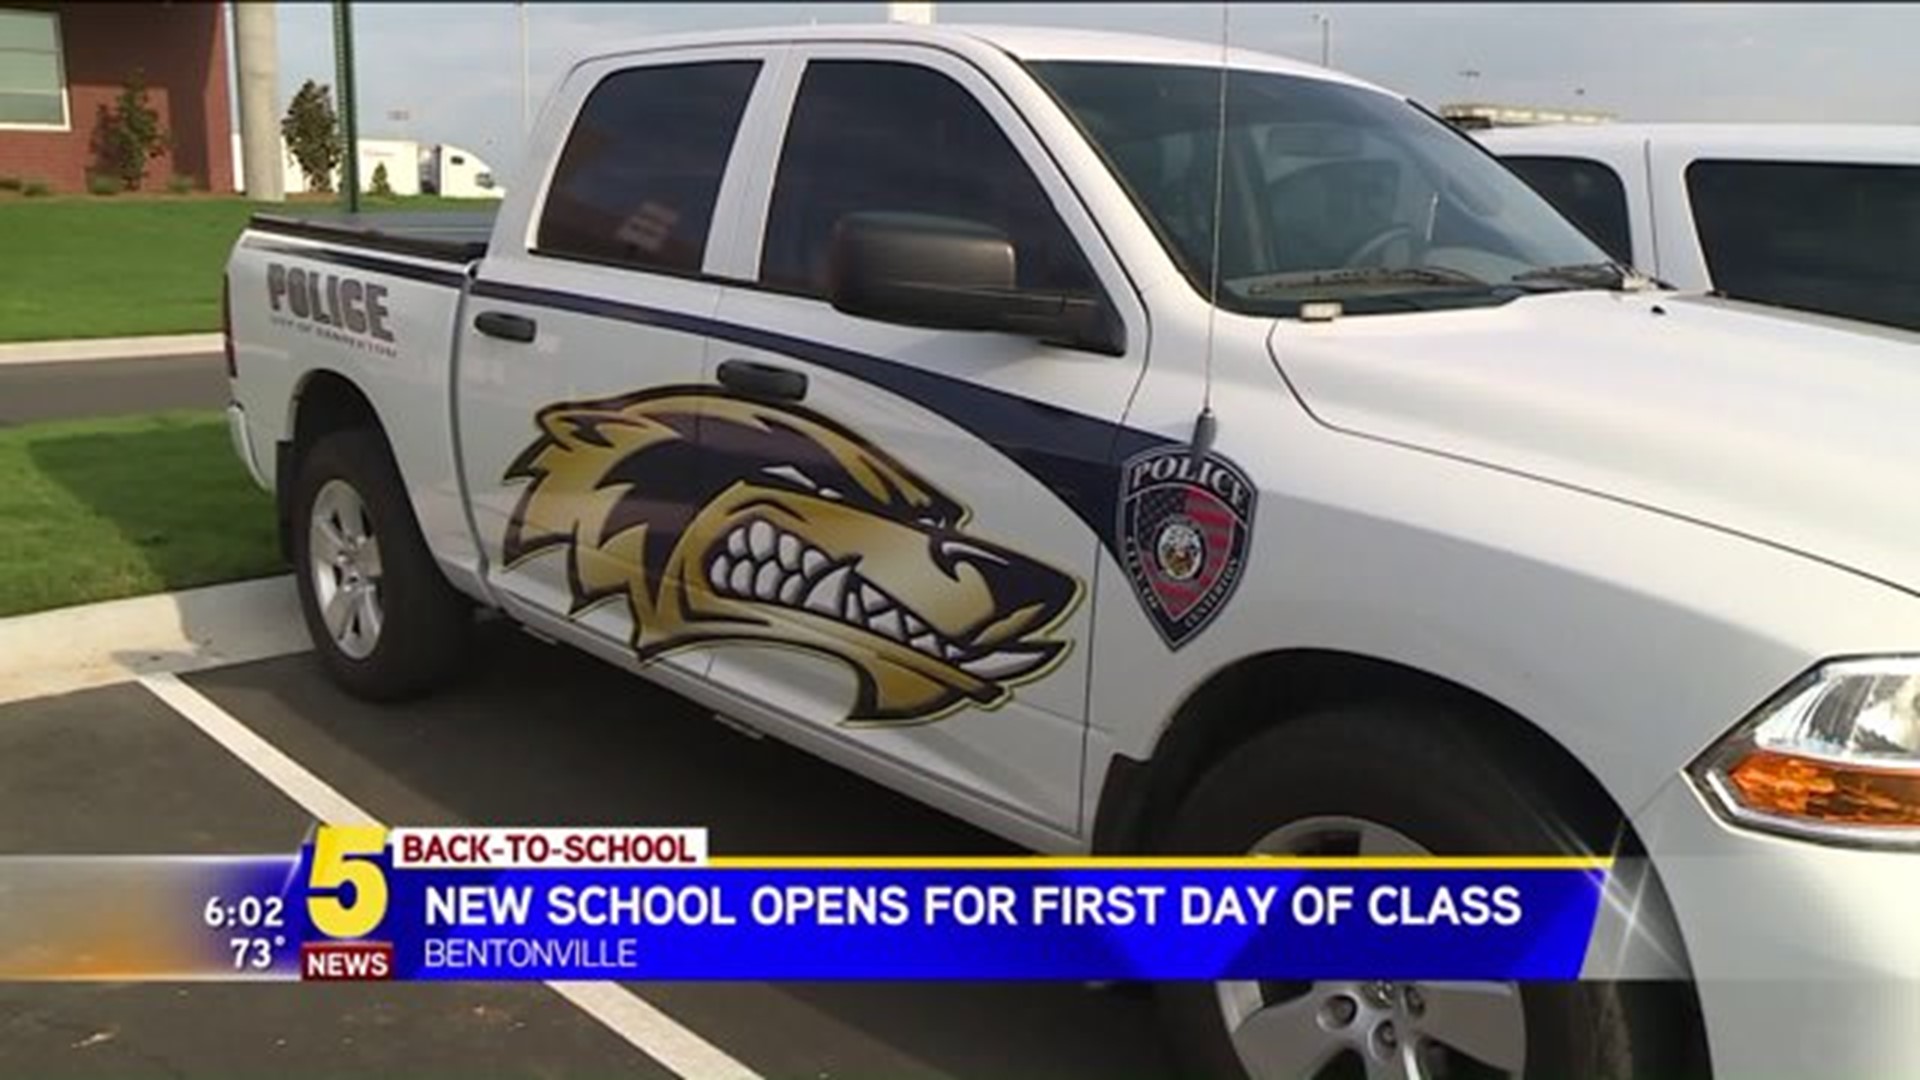 FIRST DAY OF SCHOOL FOR BENTONVILLE WEST